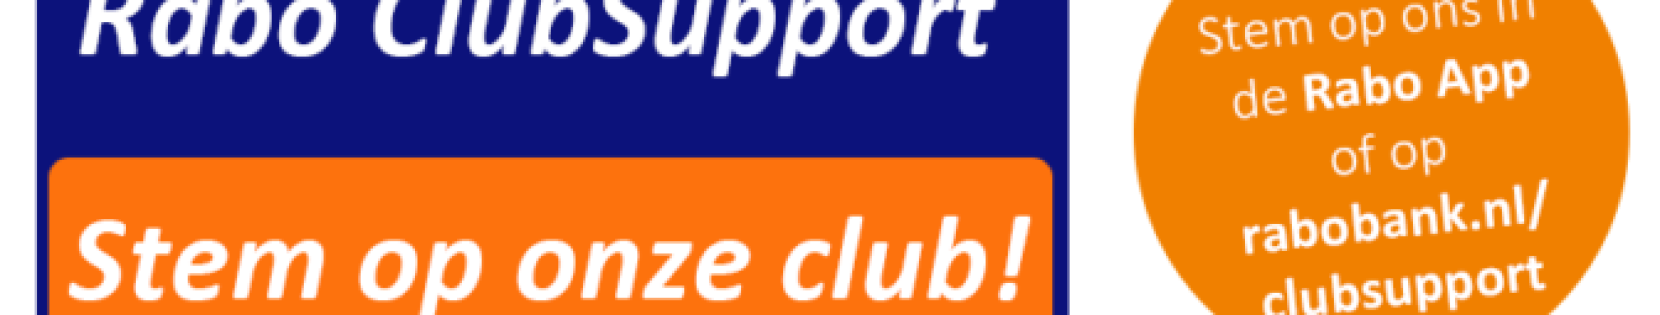 Rabobank Clubsupport